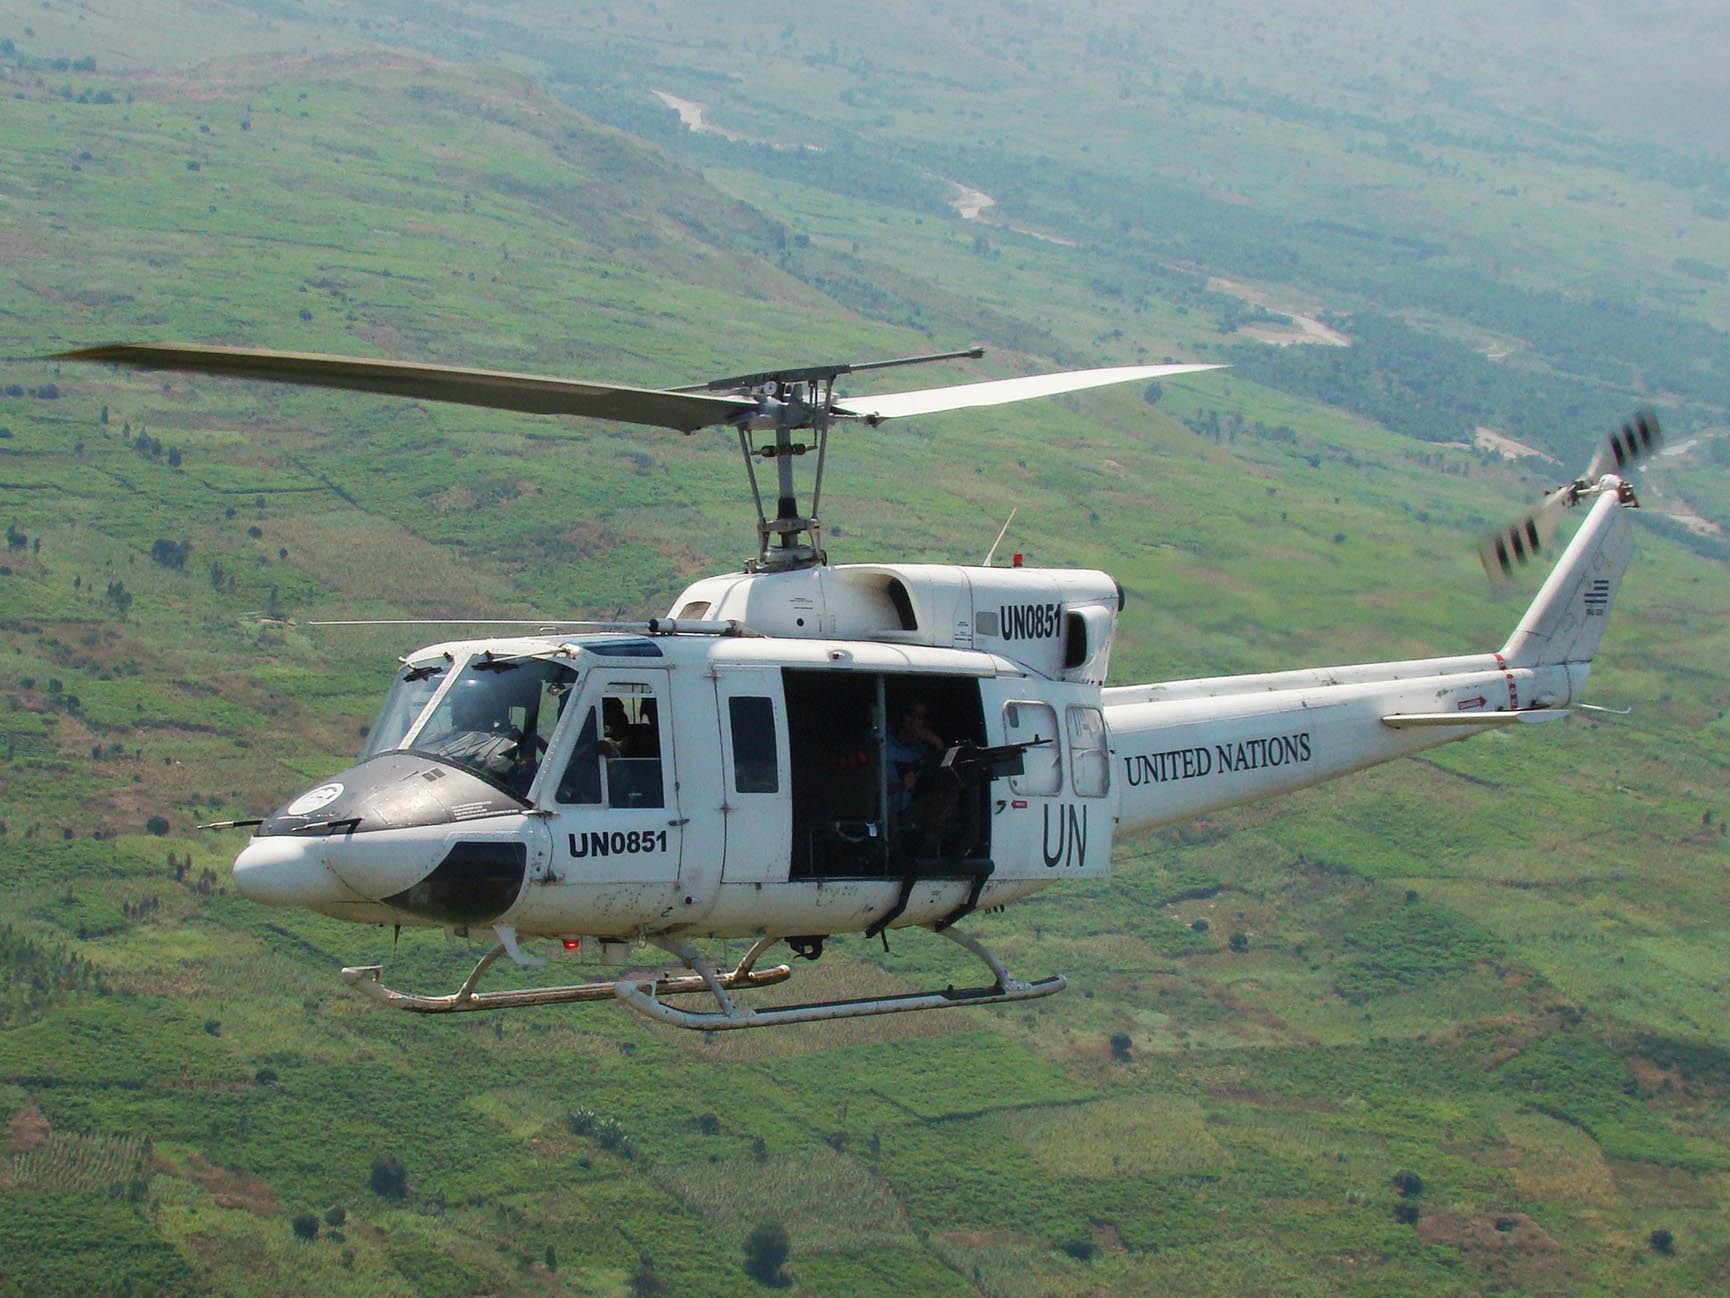 United Nations helicopter in flight over the Congo